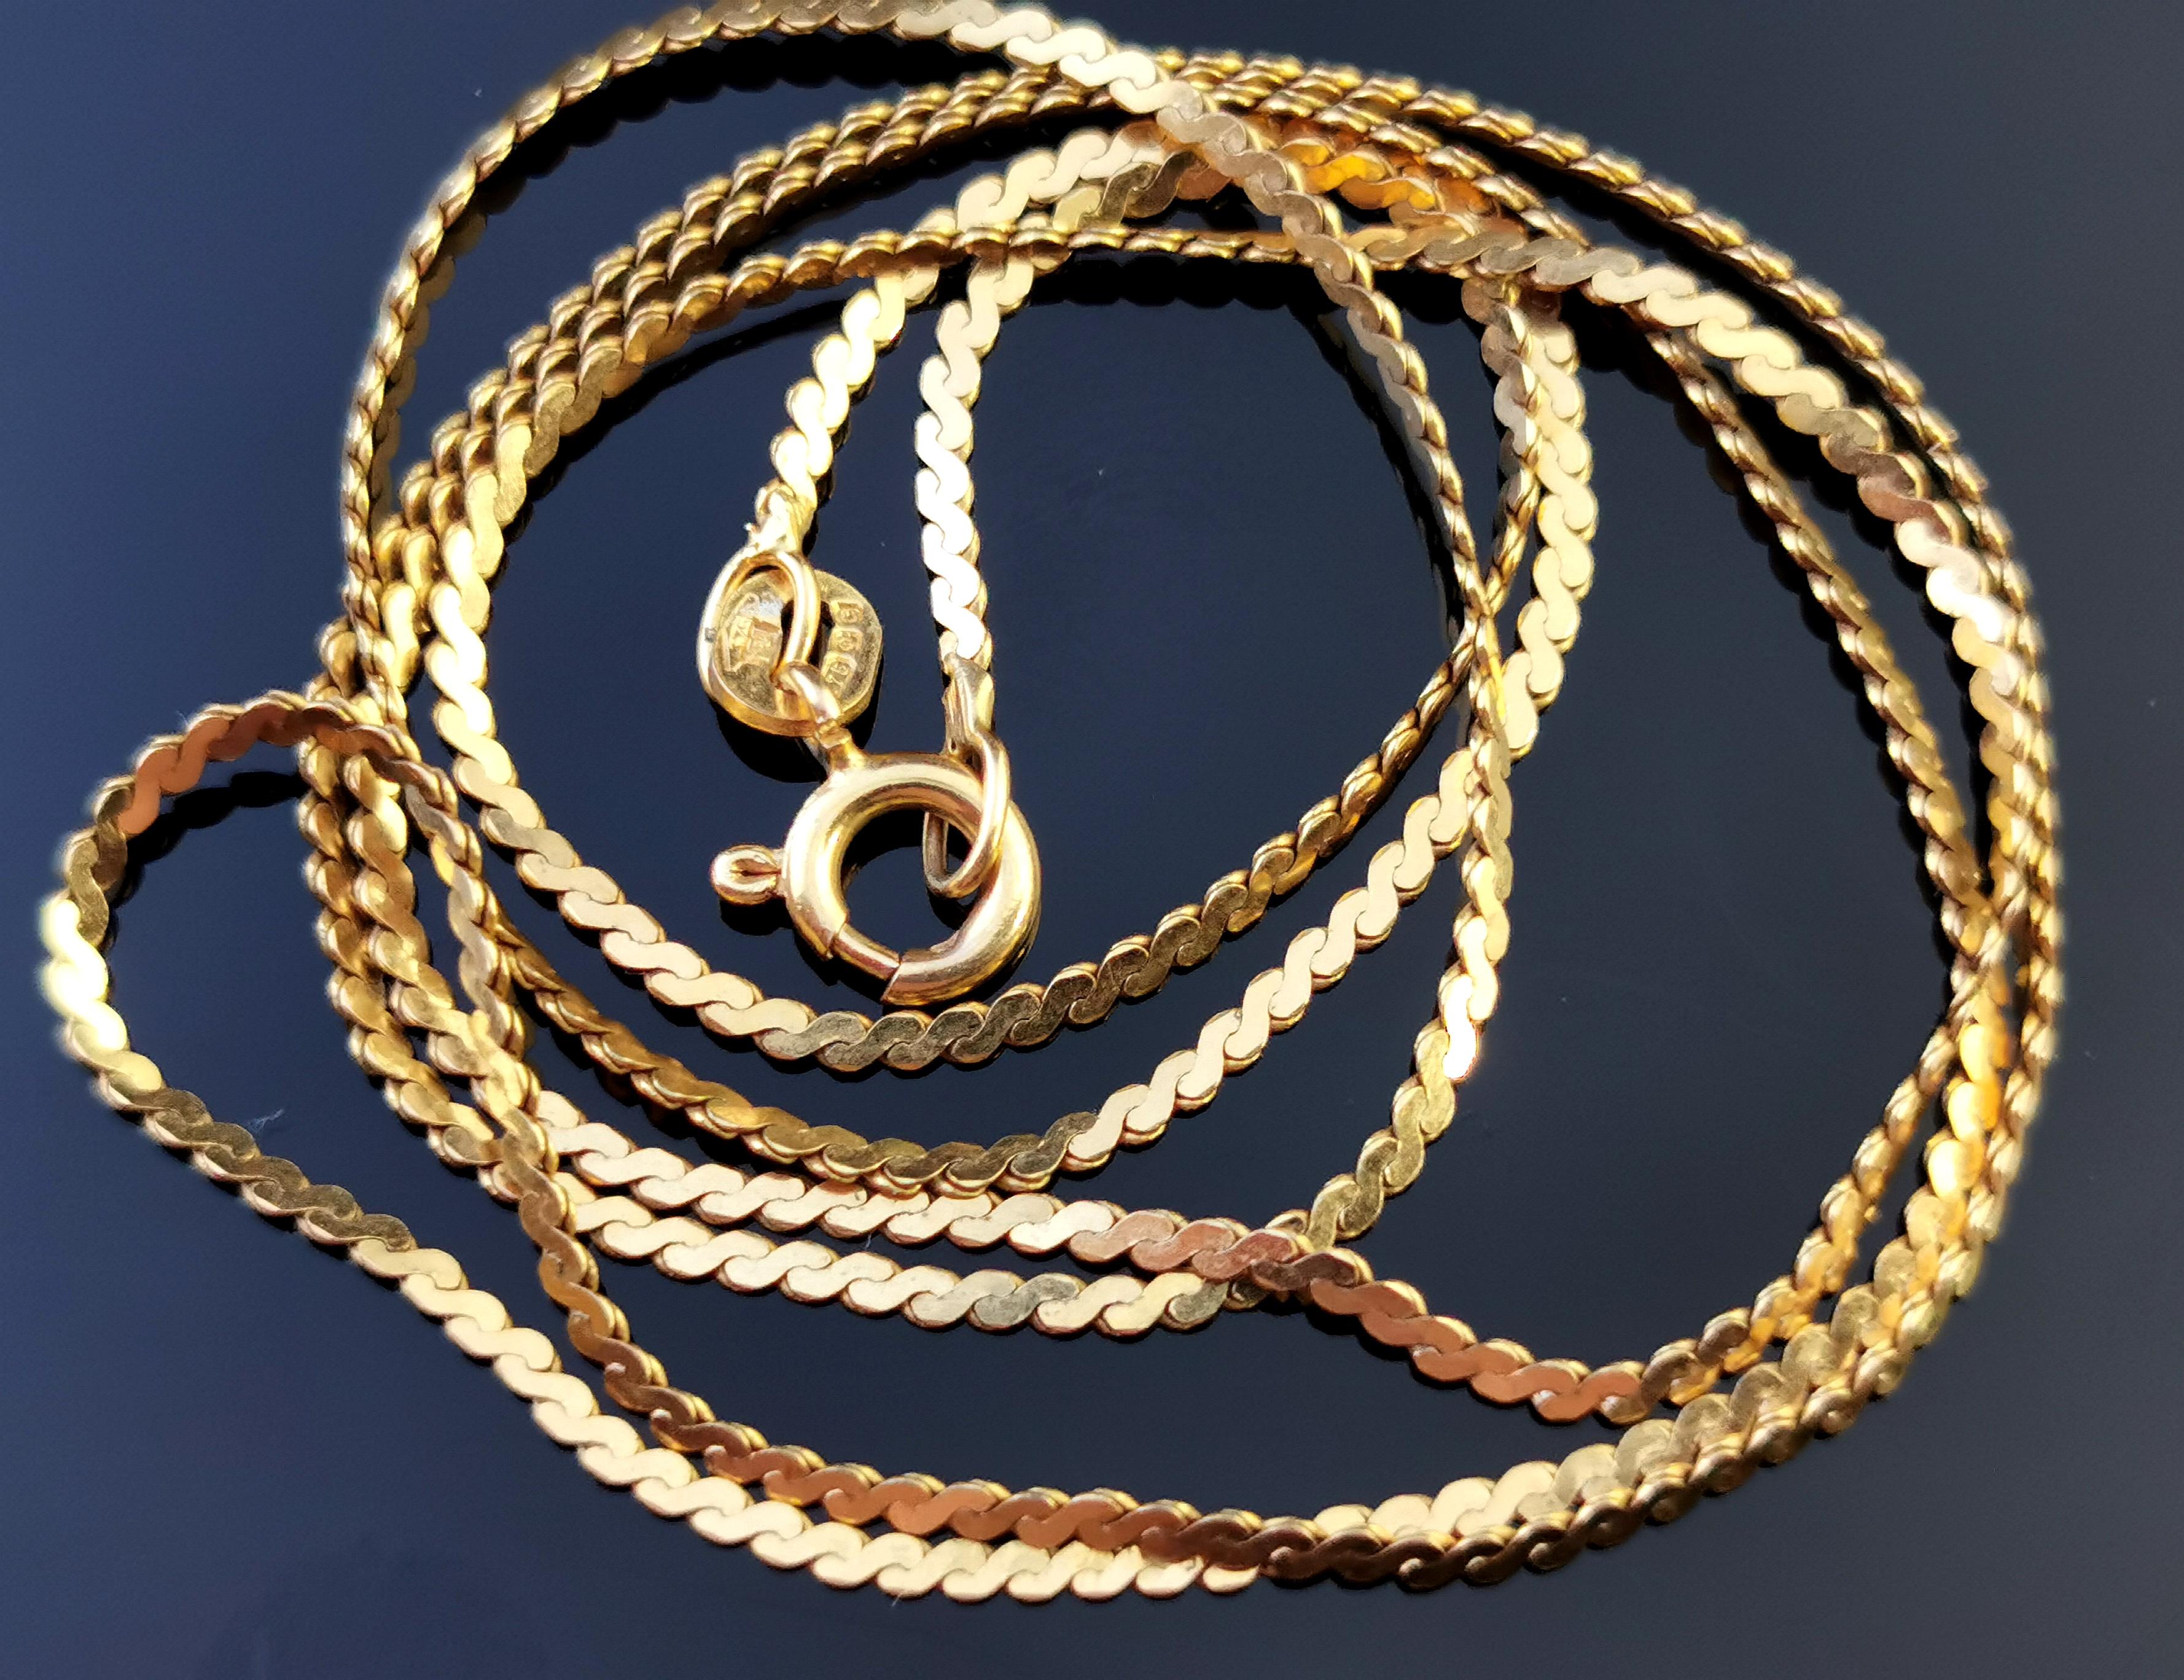 A beautiful vintage, late 20th century 9 karat gold fancy herringbone link chain necklace.

Rich yellow gold links with a pretty wavy design to the flat herringbone style links, two gold waves interlocked with one another.

The style and cut of the